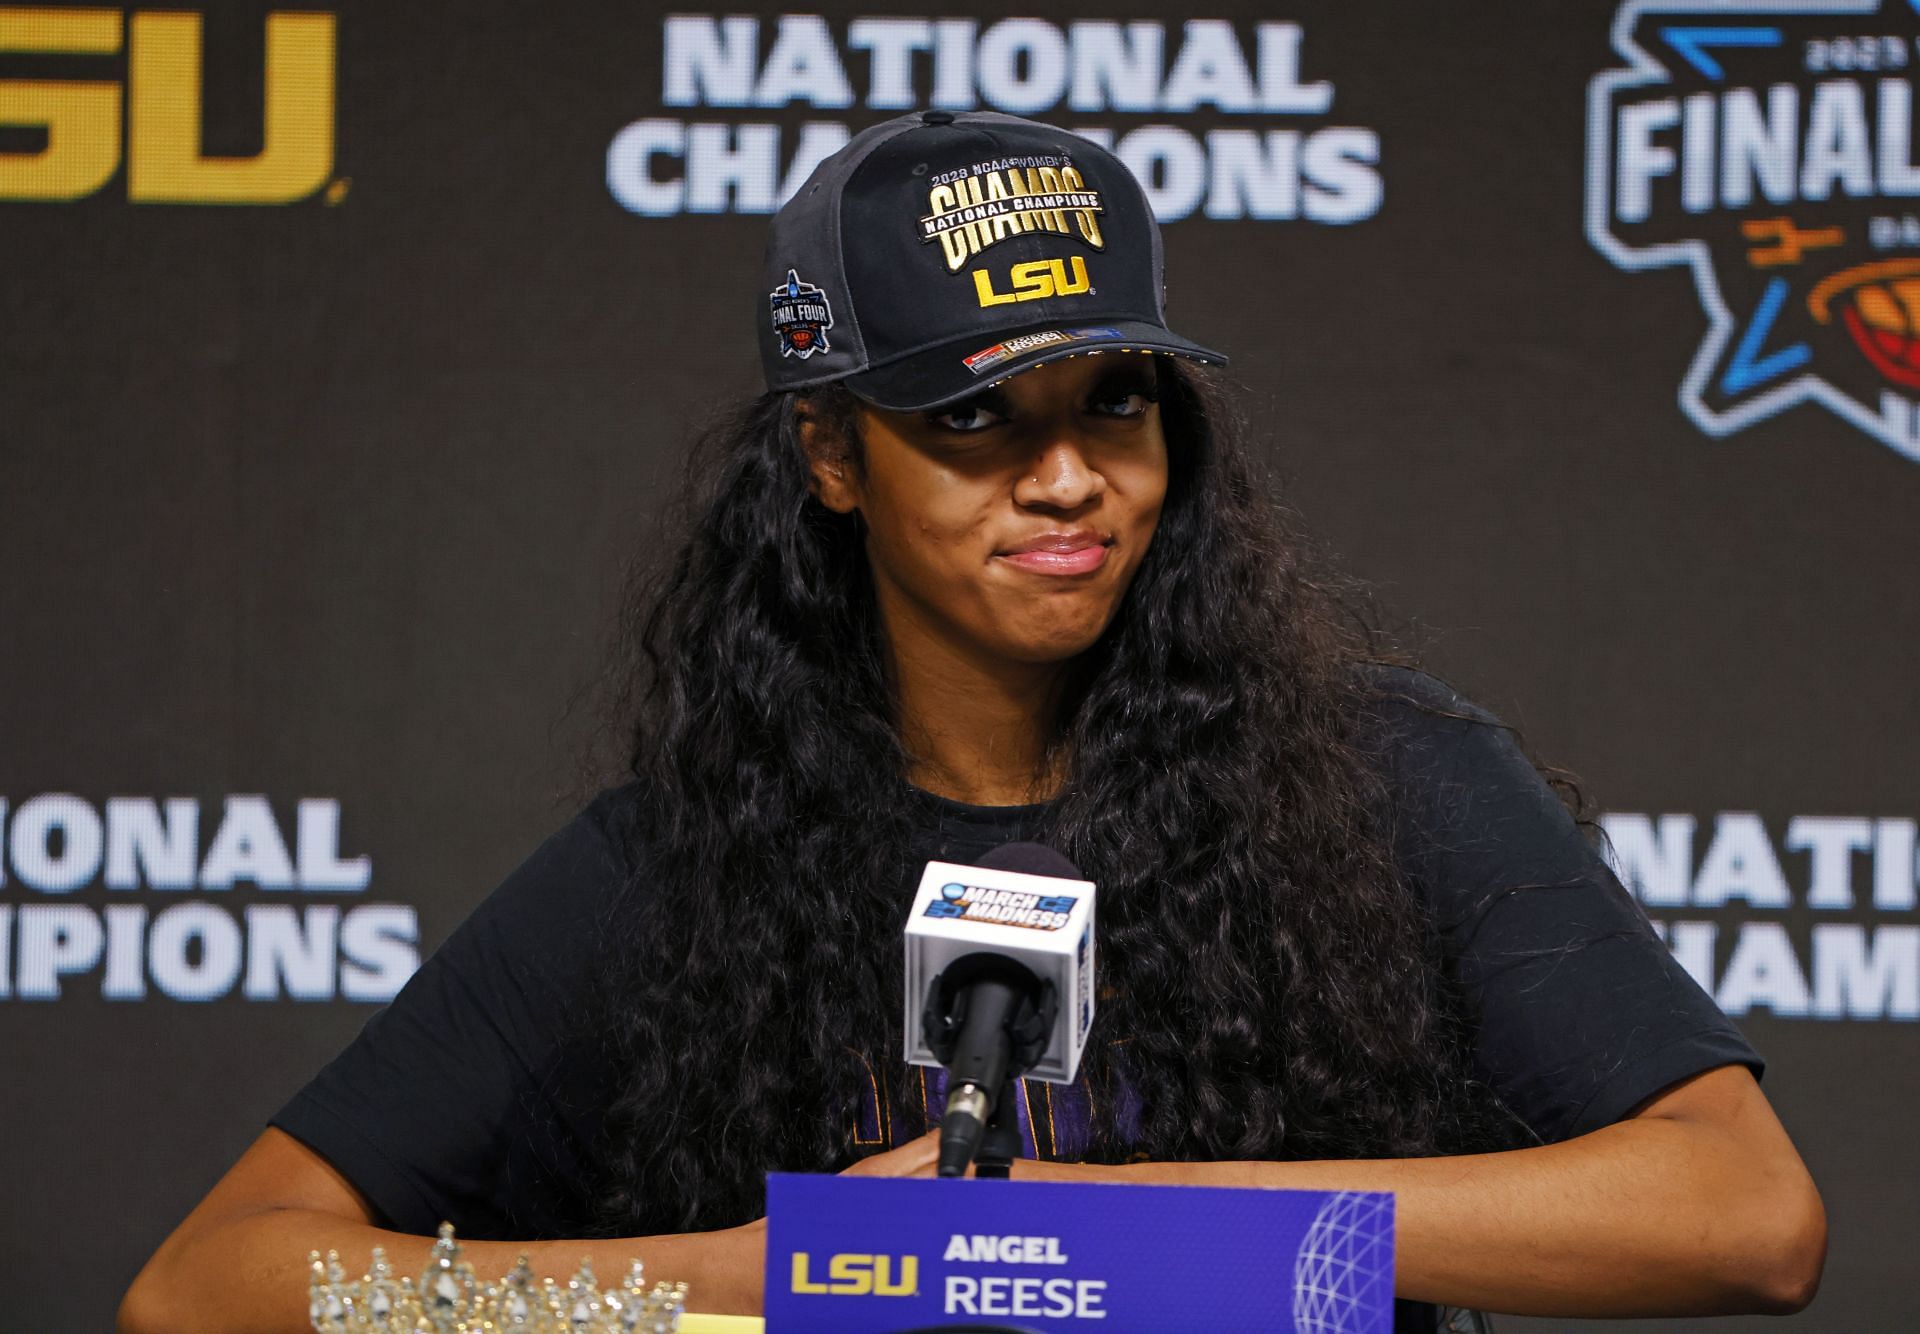 Angel Reese of the LSU Lady Tigers